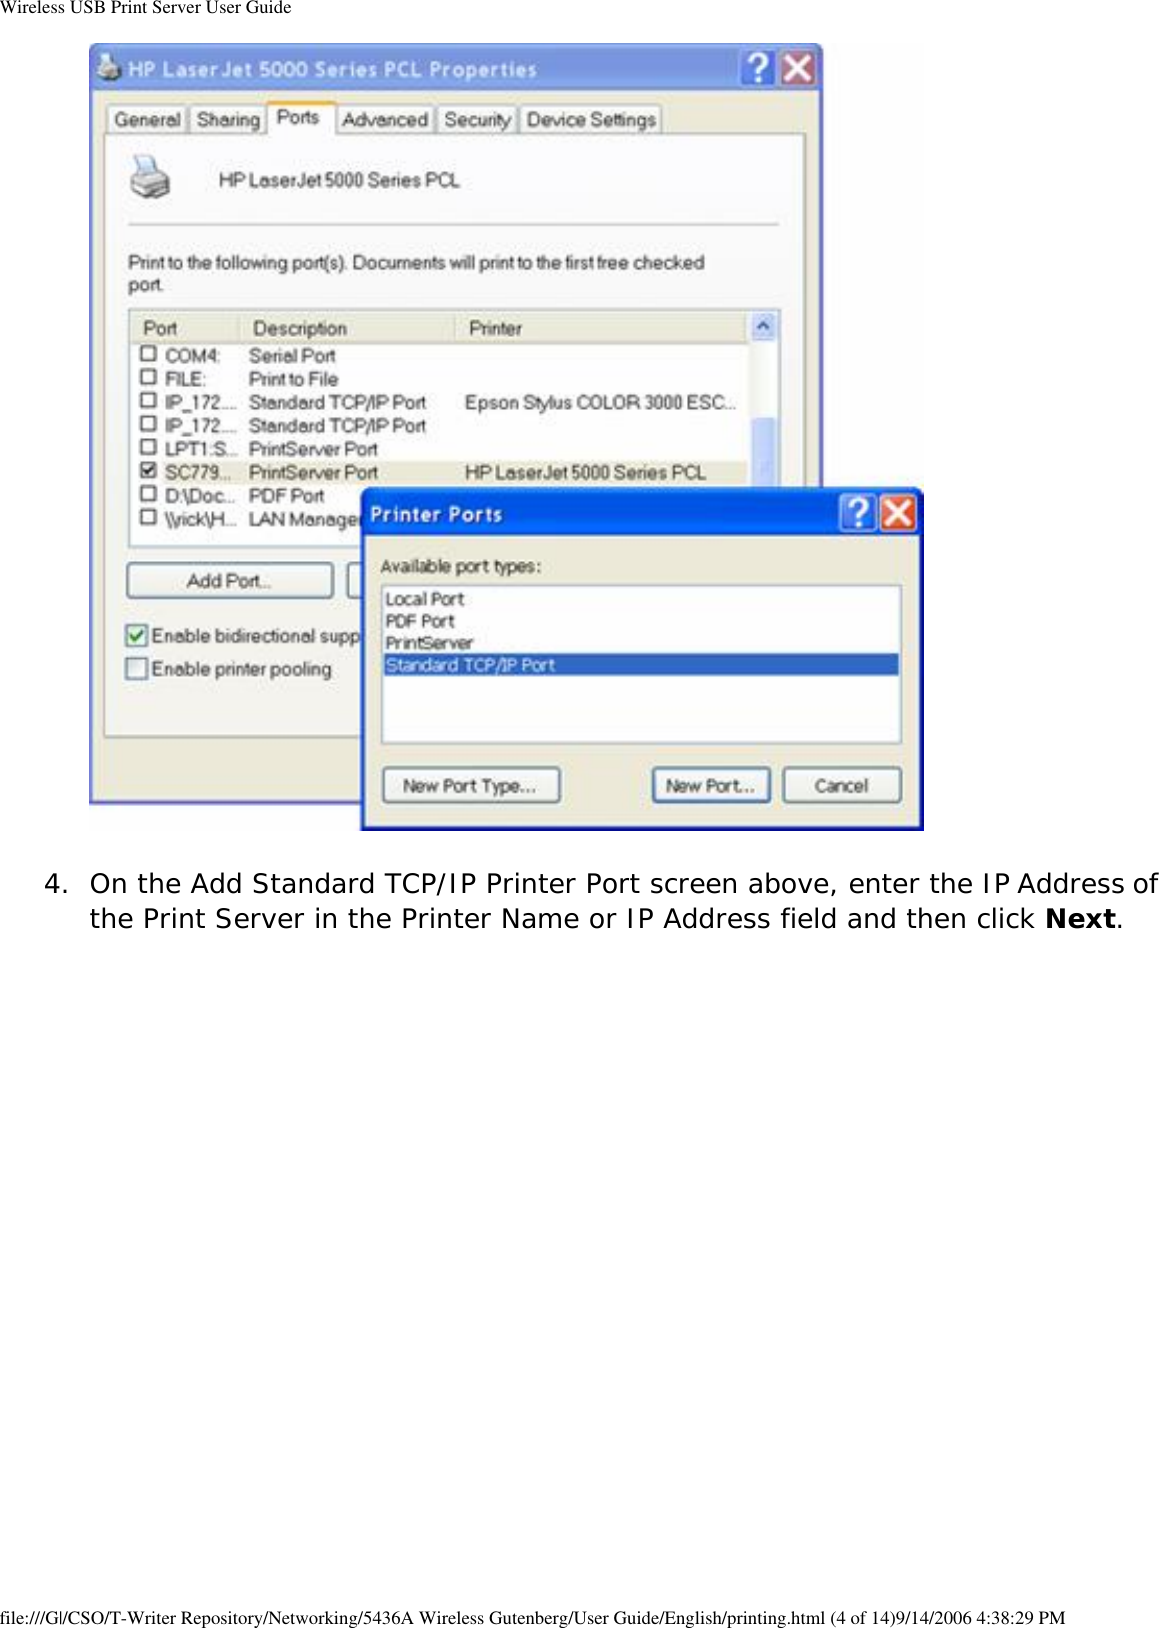 Wireless USB Print Server User Guide 4.  On the Add Standard TCP/IP Printer Port screen above, enter the IP Address of the Print Server in the Printer Name or IP Address field and then click Next.   file:///G|/CSO/T-Writer Repository/Networking/5436A Wireless Gutenberg/User Guide/English/printing.html (4 of 14)9/14/2006 4:38:29 PM